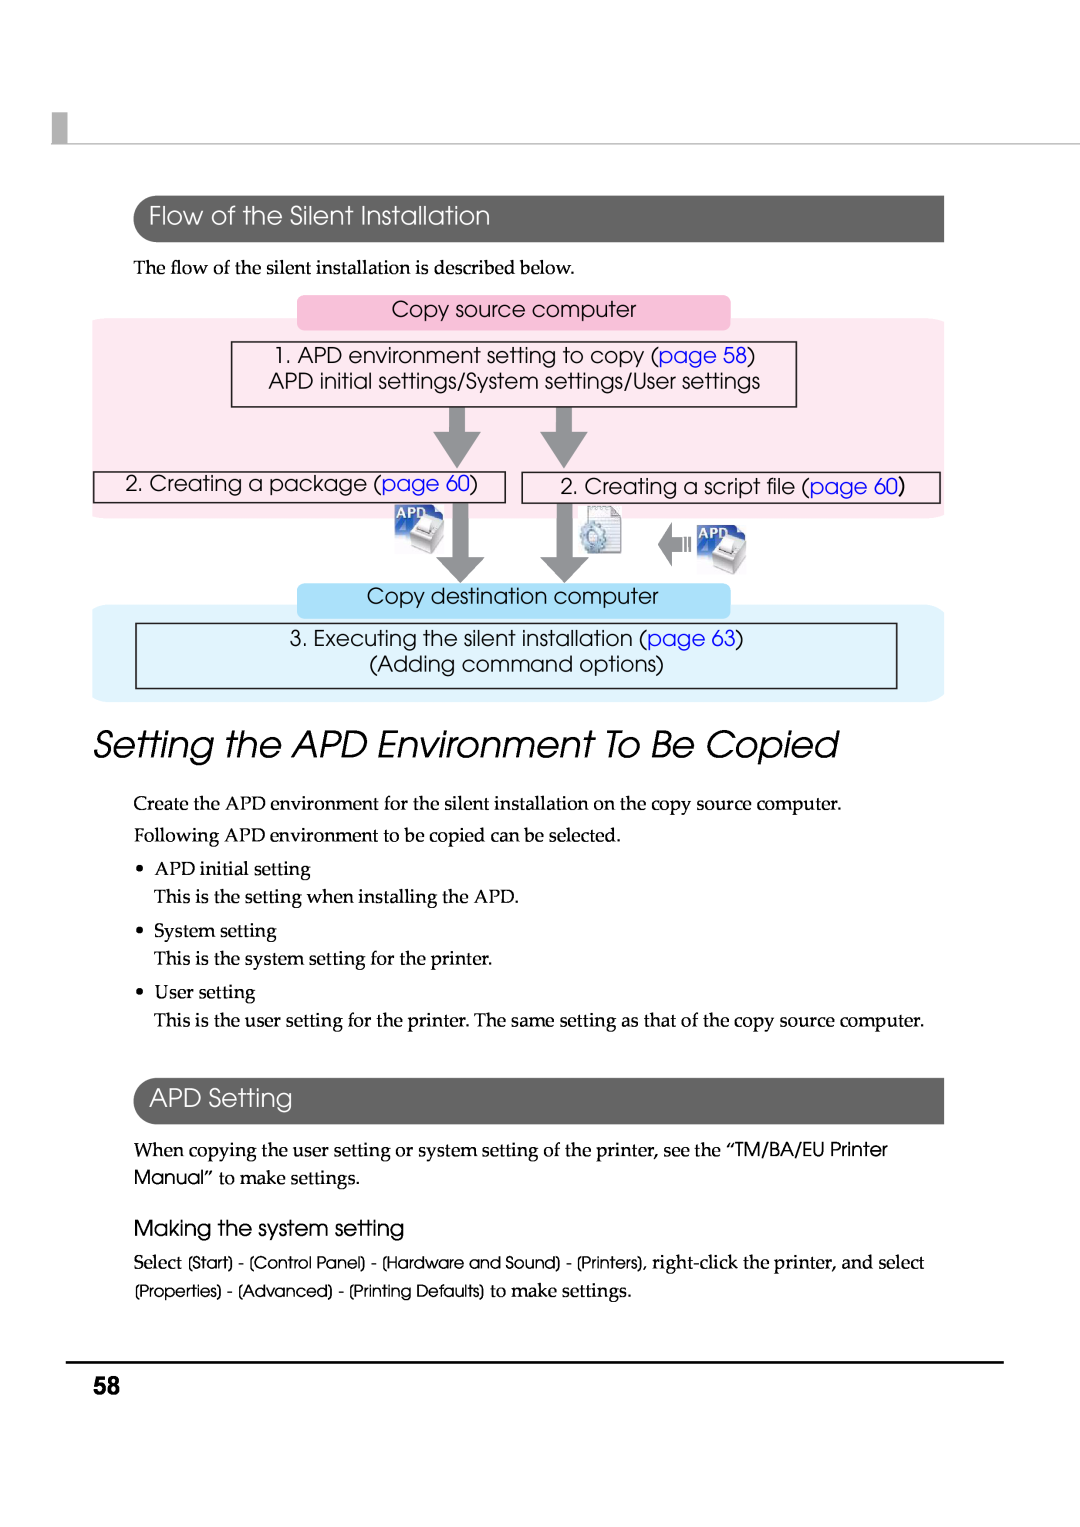 Epson M00002104 install manual Setting the APD Environment To Be Copied, Flow of the Silent Installation, APD Setting 